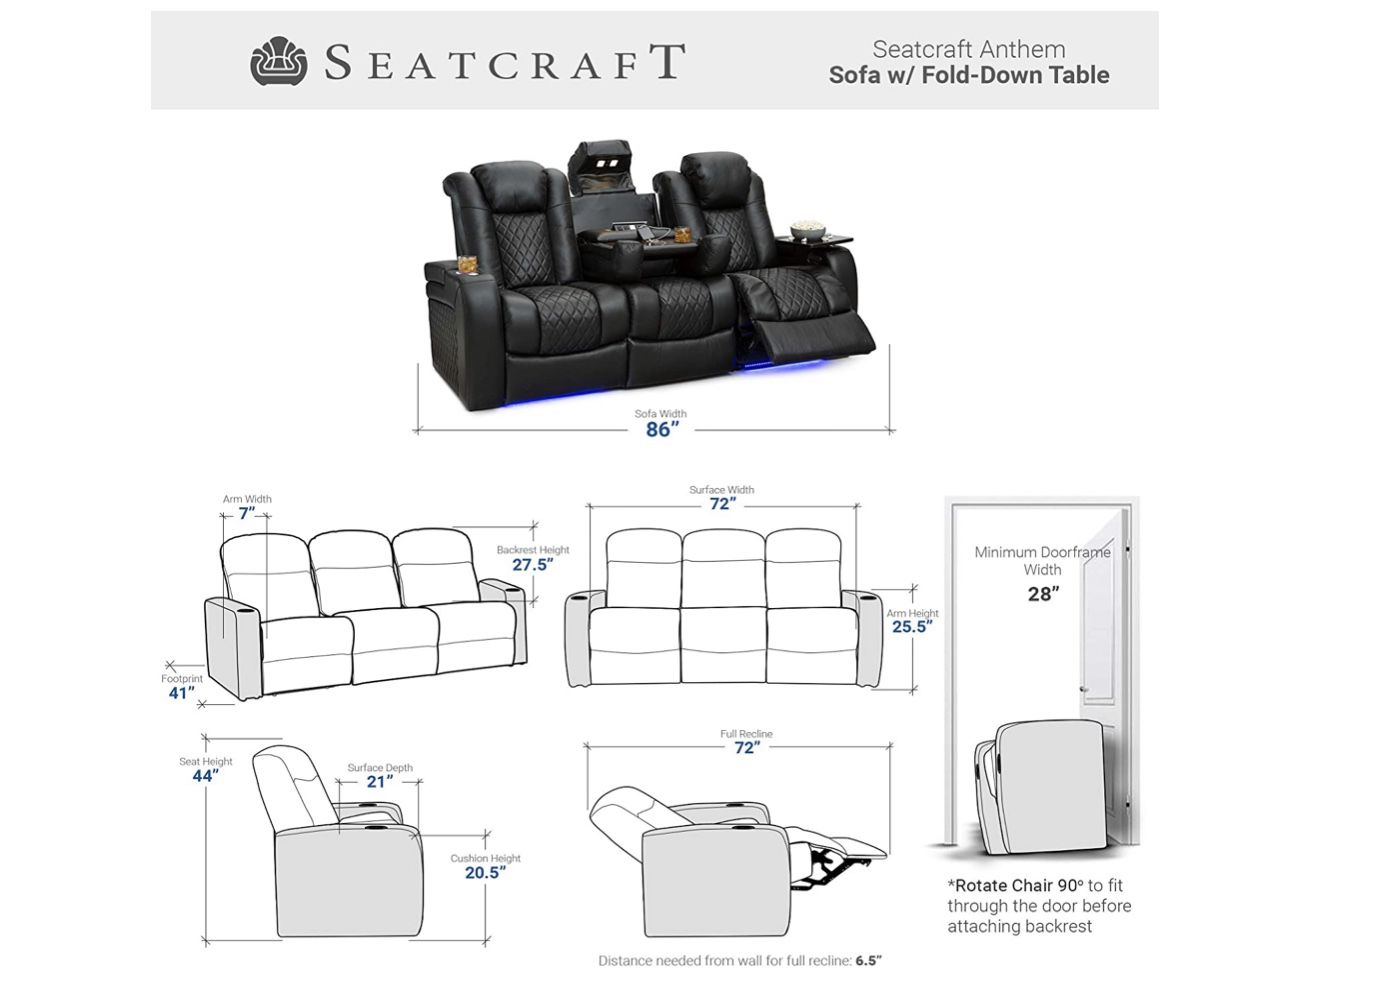 Black Leather Luxury Comfort Electric Couch & Recliner Set - Light Up Blue LEDs, Hidden Compartments, & More!